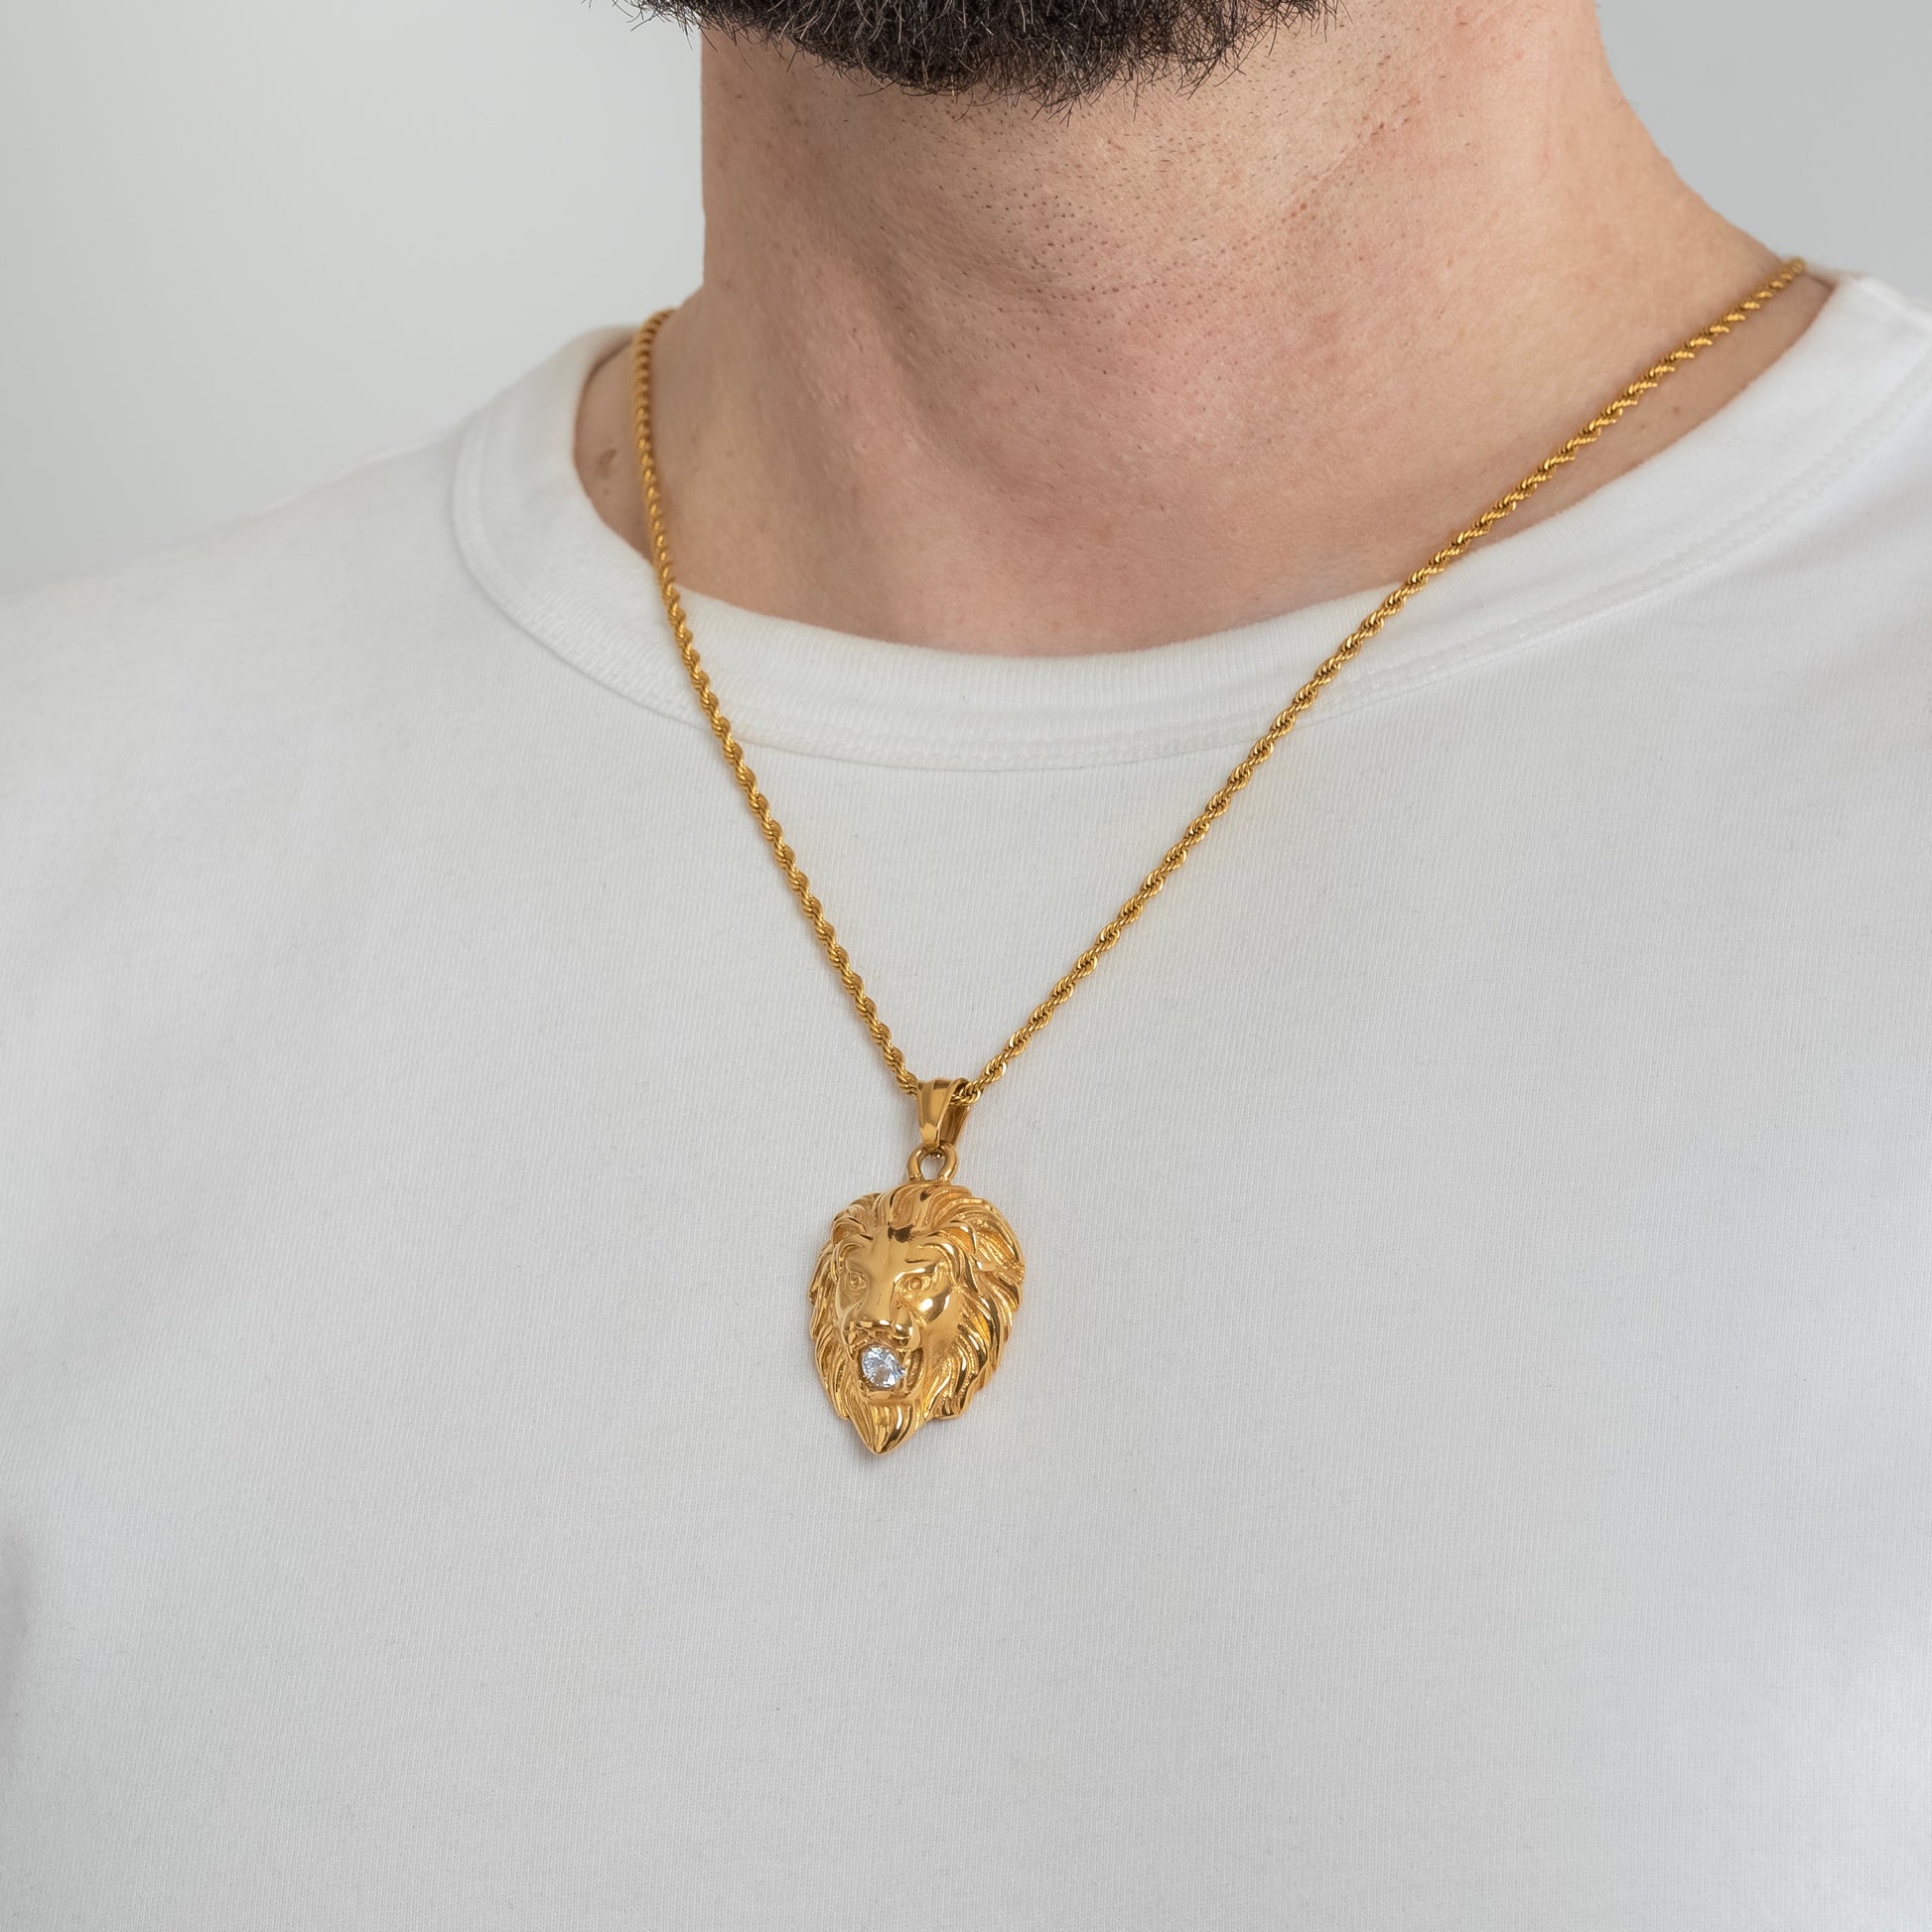 A male model in a white t-shirt wearing a Lion Head Crystal Gold Pendant with a Gold Rope chain 22 inches. Close-up image of the non-tarnish trending necklace with Cubic Zirconia stone insert in Lion's mouth.